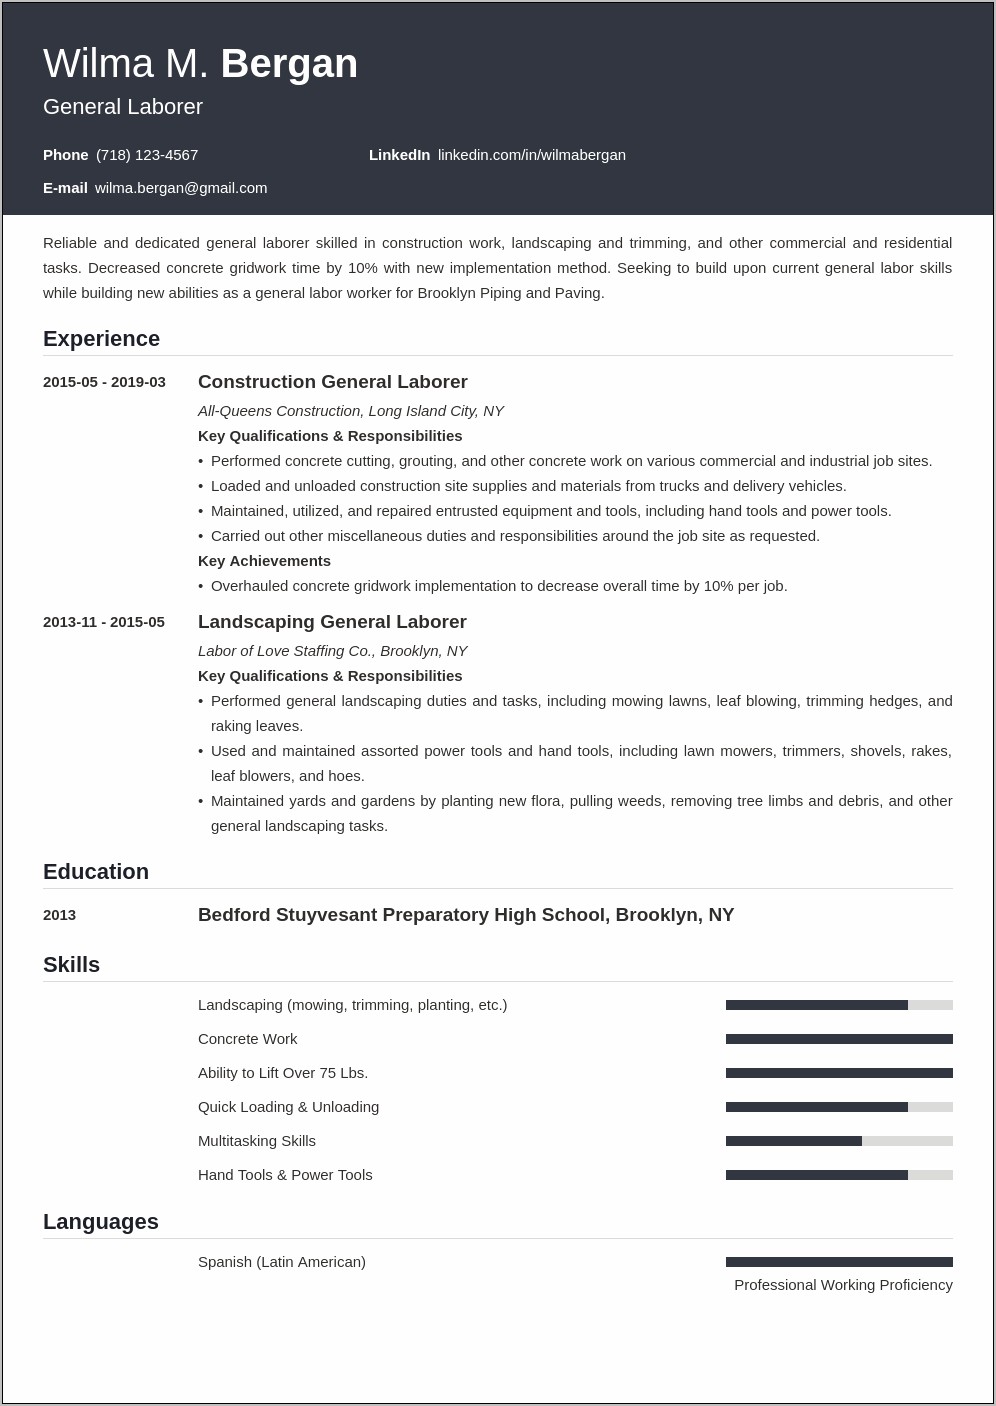 Resume Objective For A General Laborer